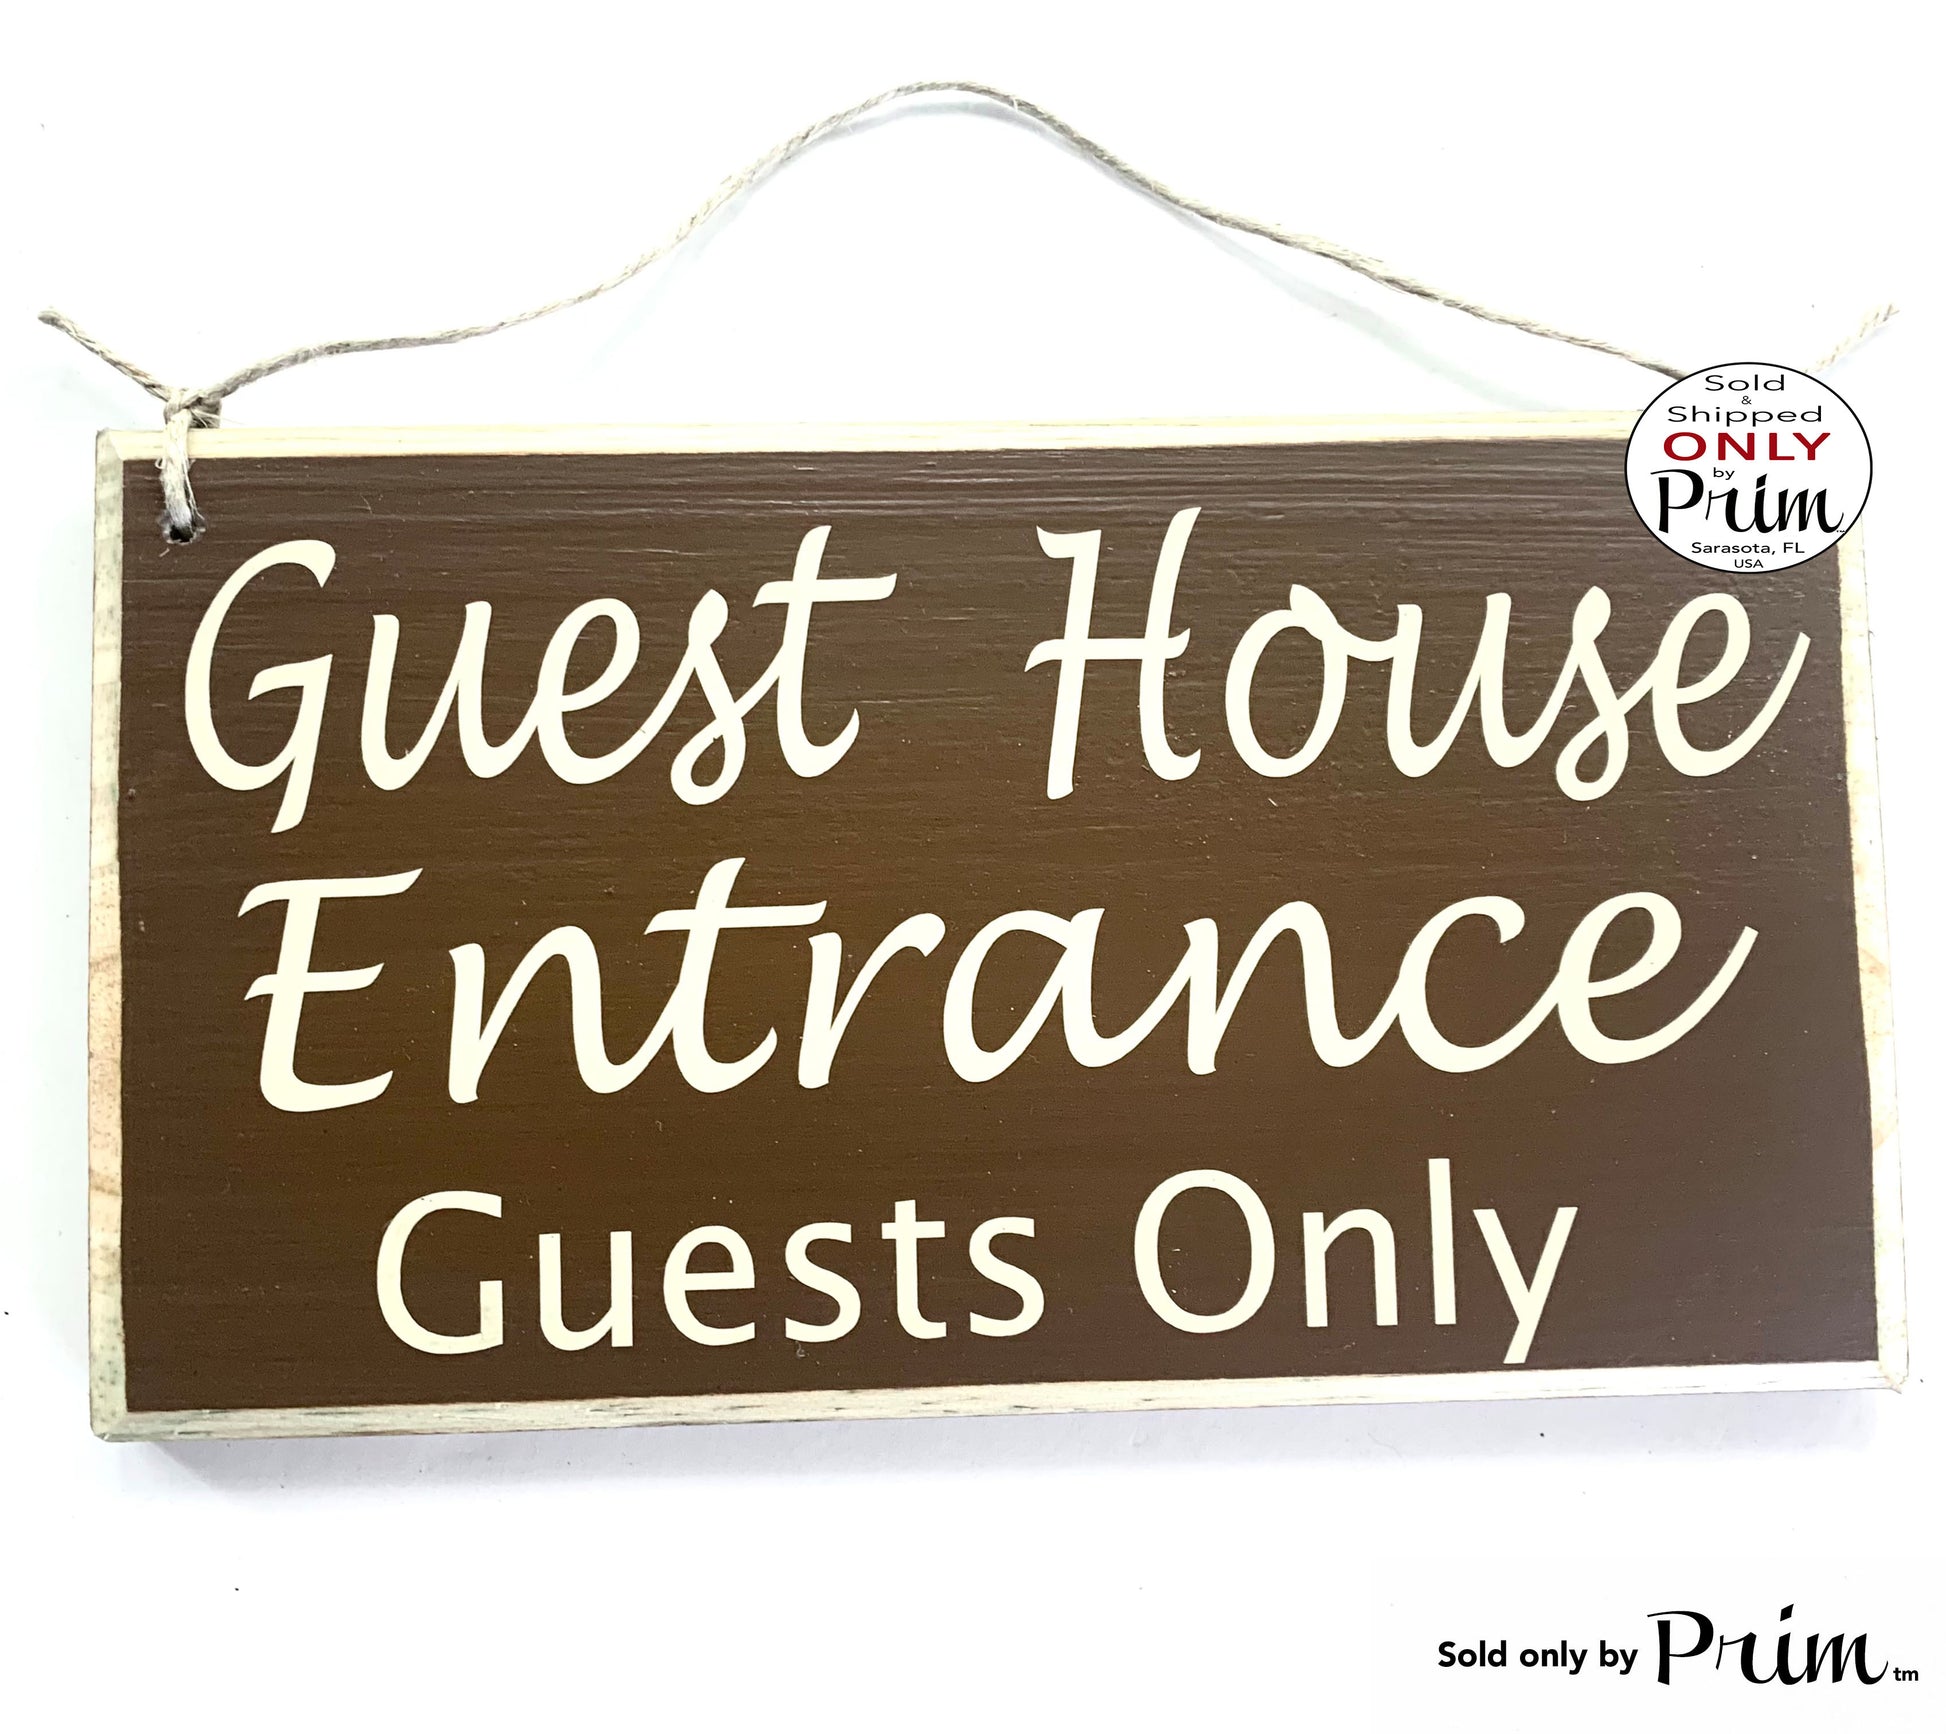 10x6 Guest House Entrance Guests Only Custom Wood Sign Suite Quarters Cottage Bed and Breakfast AirBnb Welcome Wall Door Hanging Plaque Designs by Prim